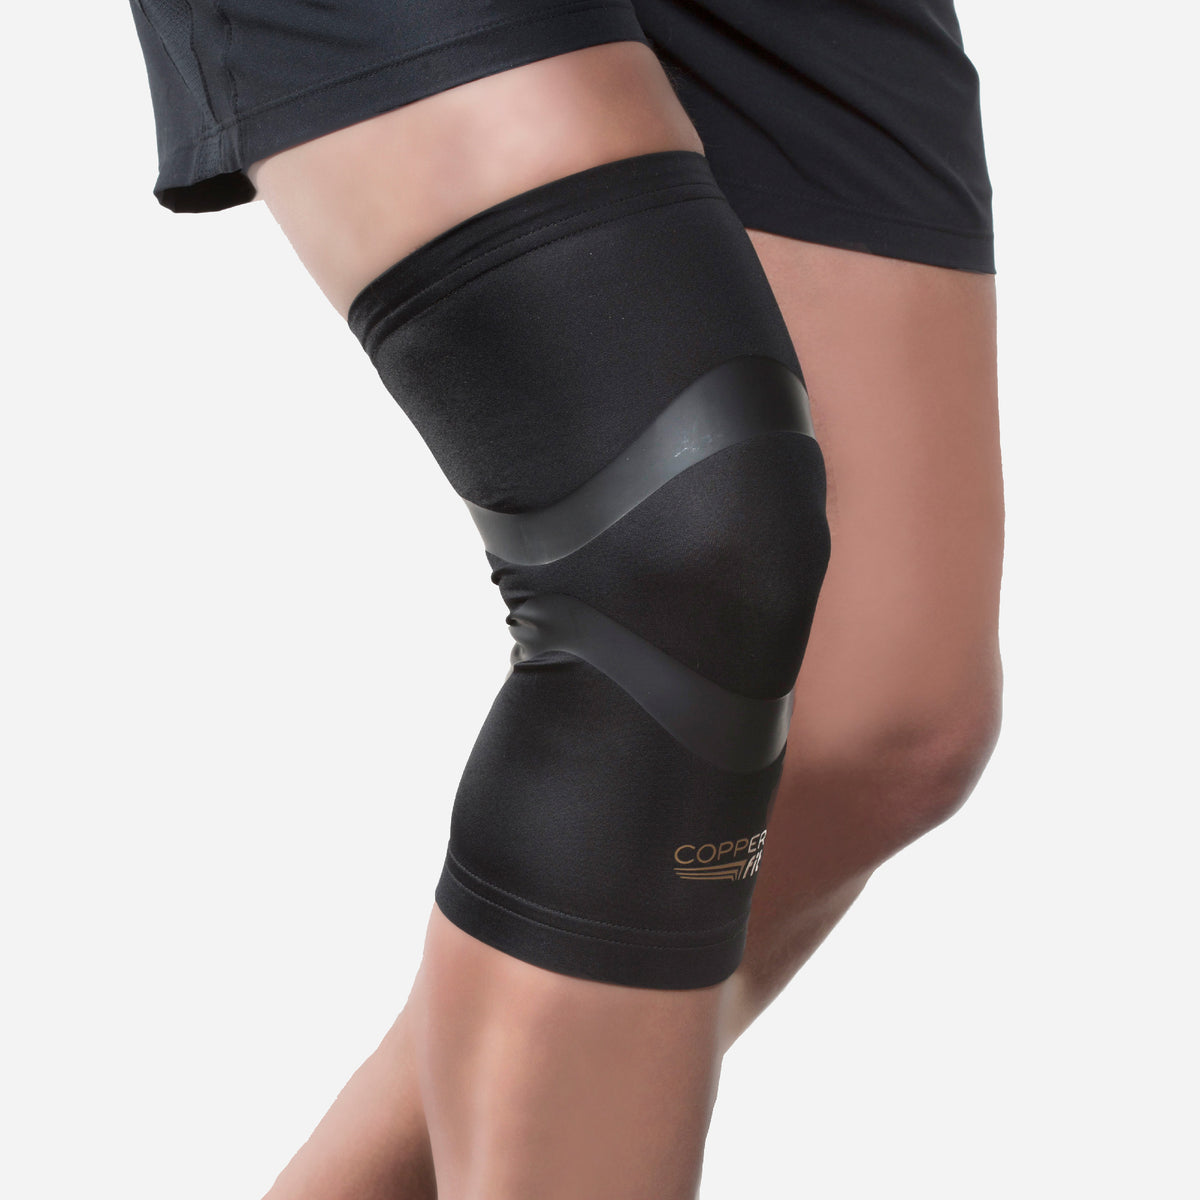 Vibration+Heat Therapy Knee/Elbow Wrap – Copper Compression